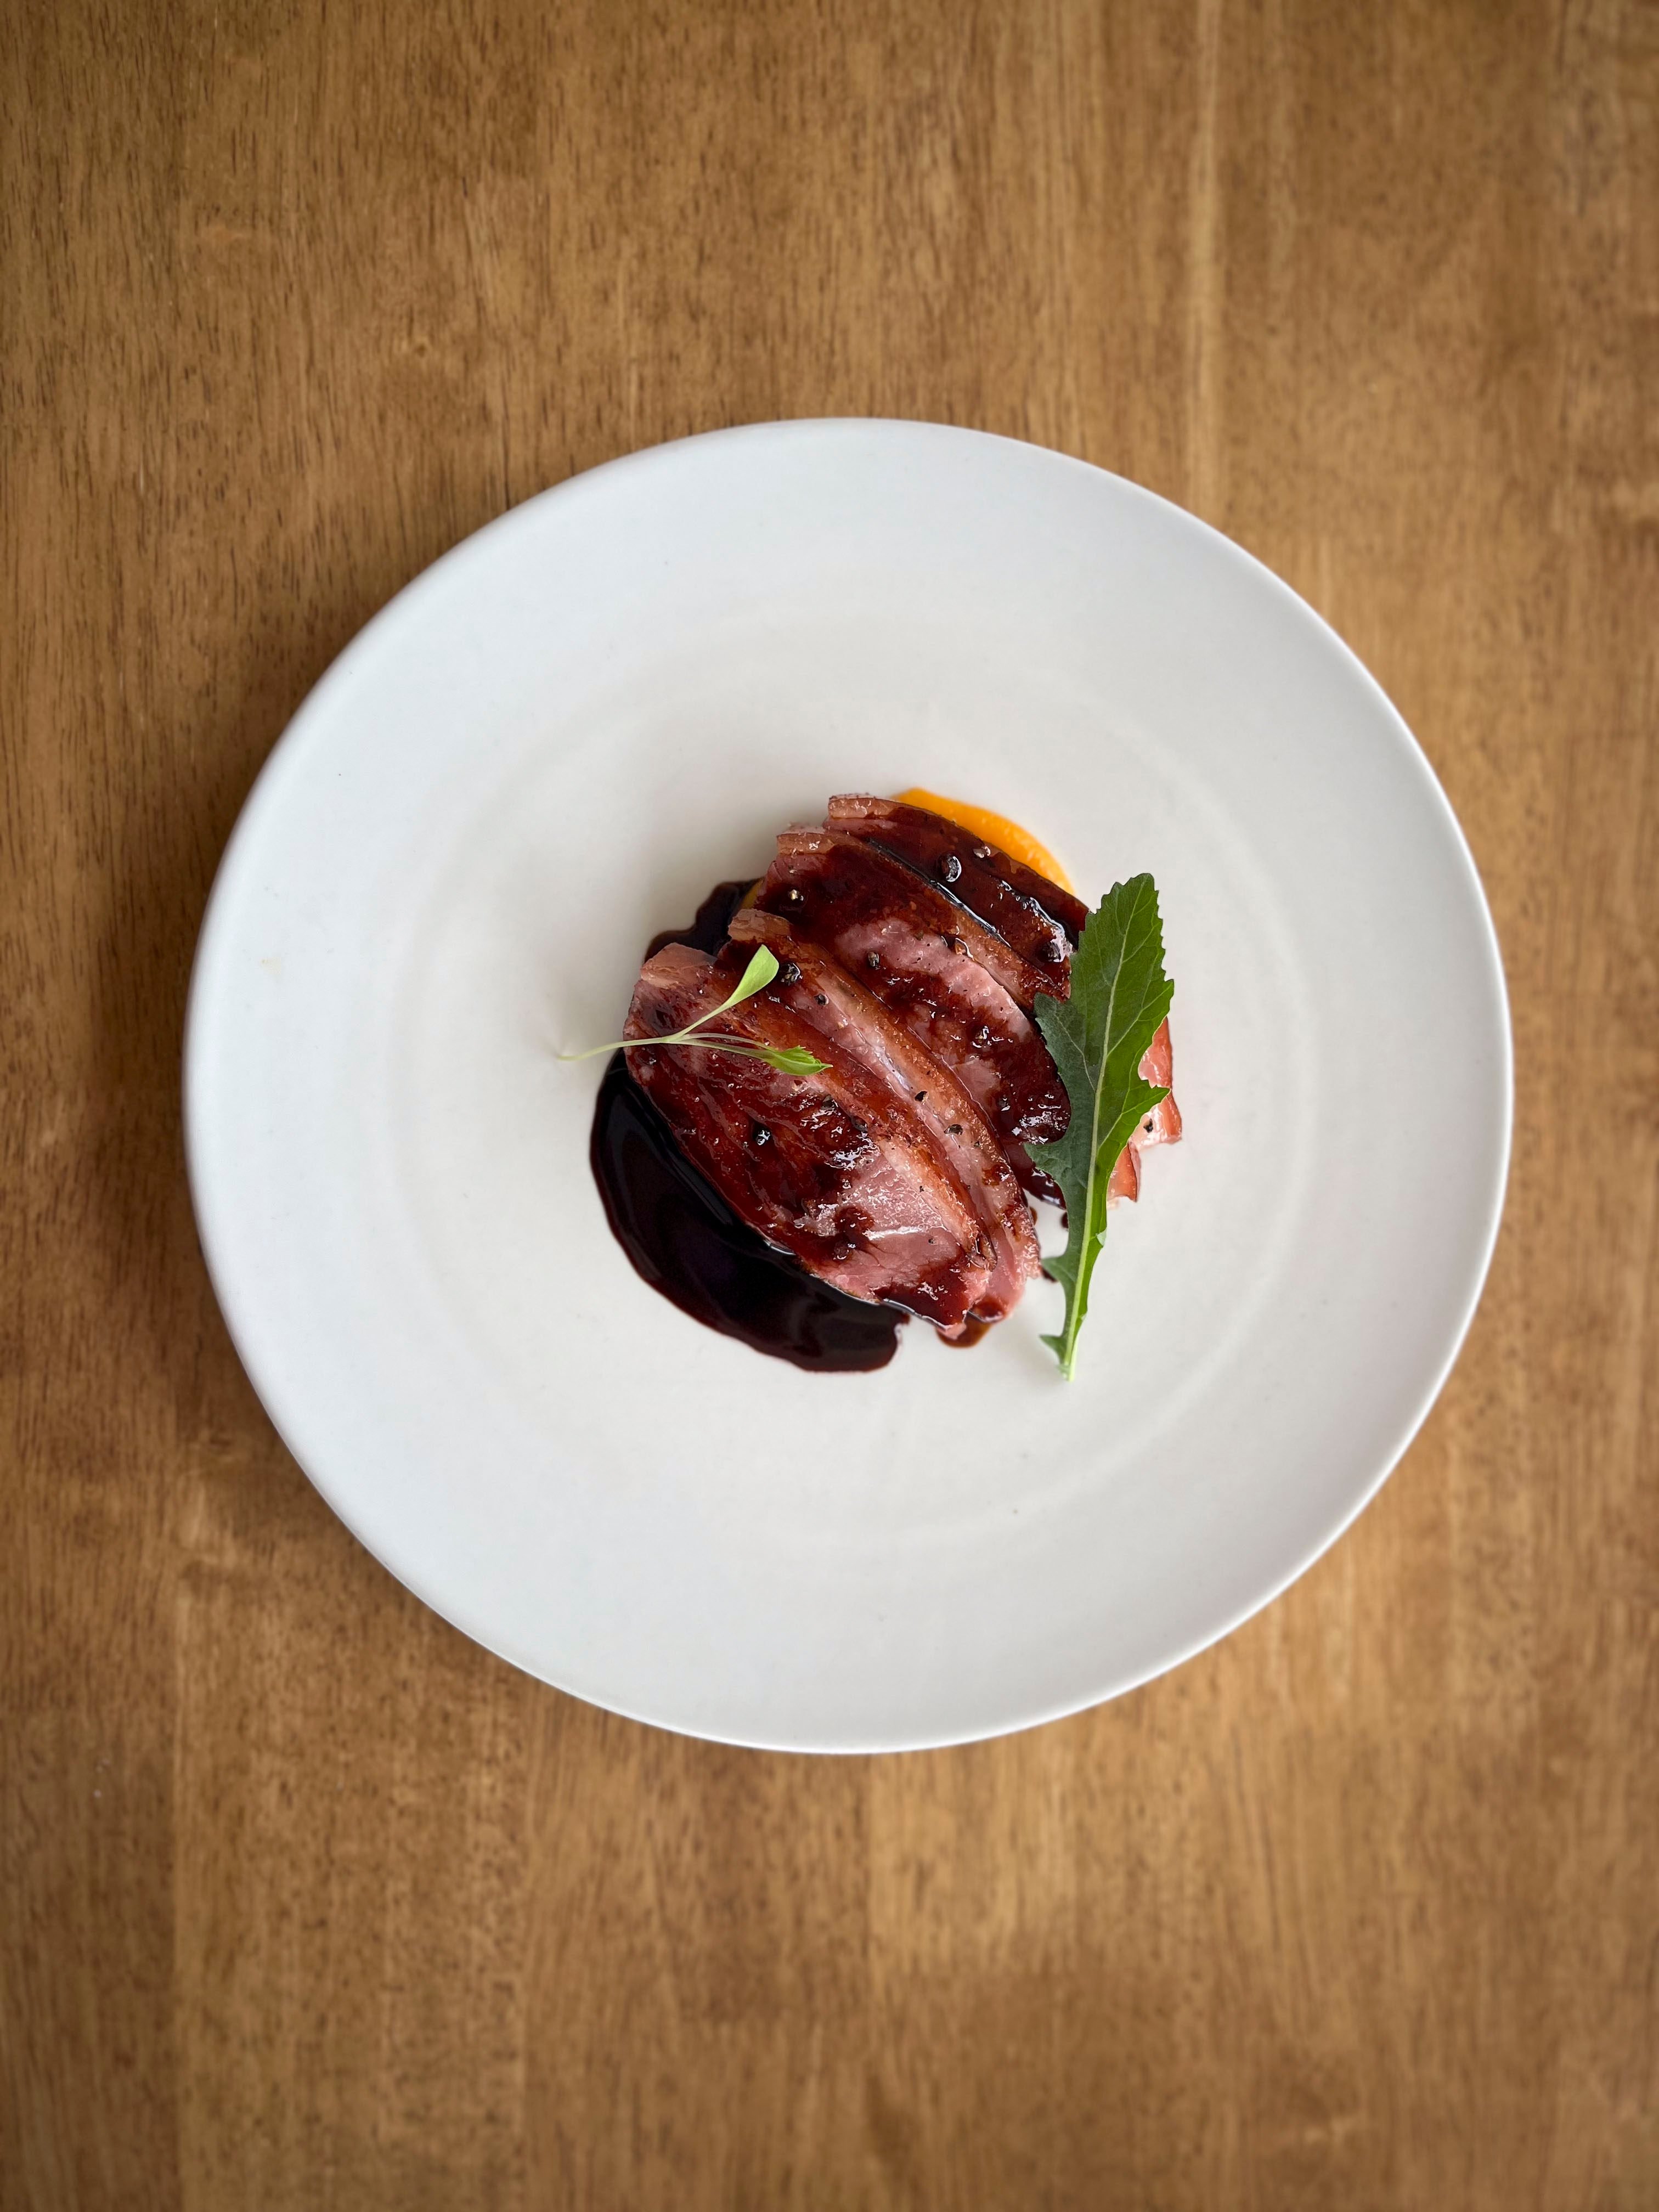 Palate’s duck aged for 2-3 weeks smoked with apple wood, cooked over charcoal, carrot puree and gastric sauce in Busan, South Korea. Photo: Charmaine Mok